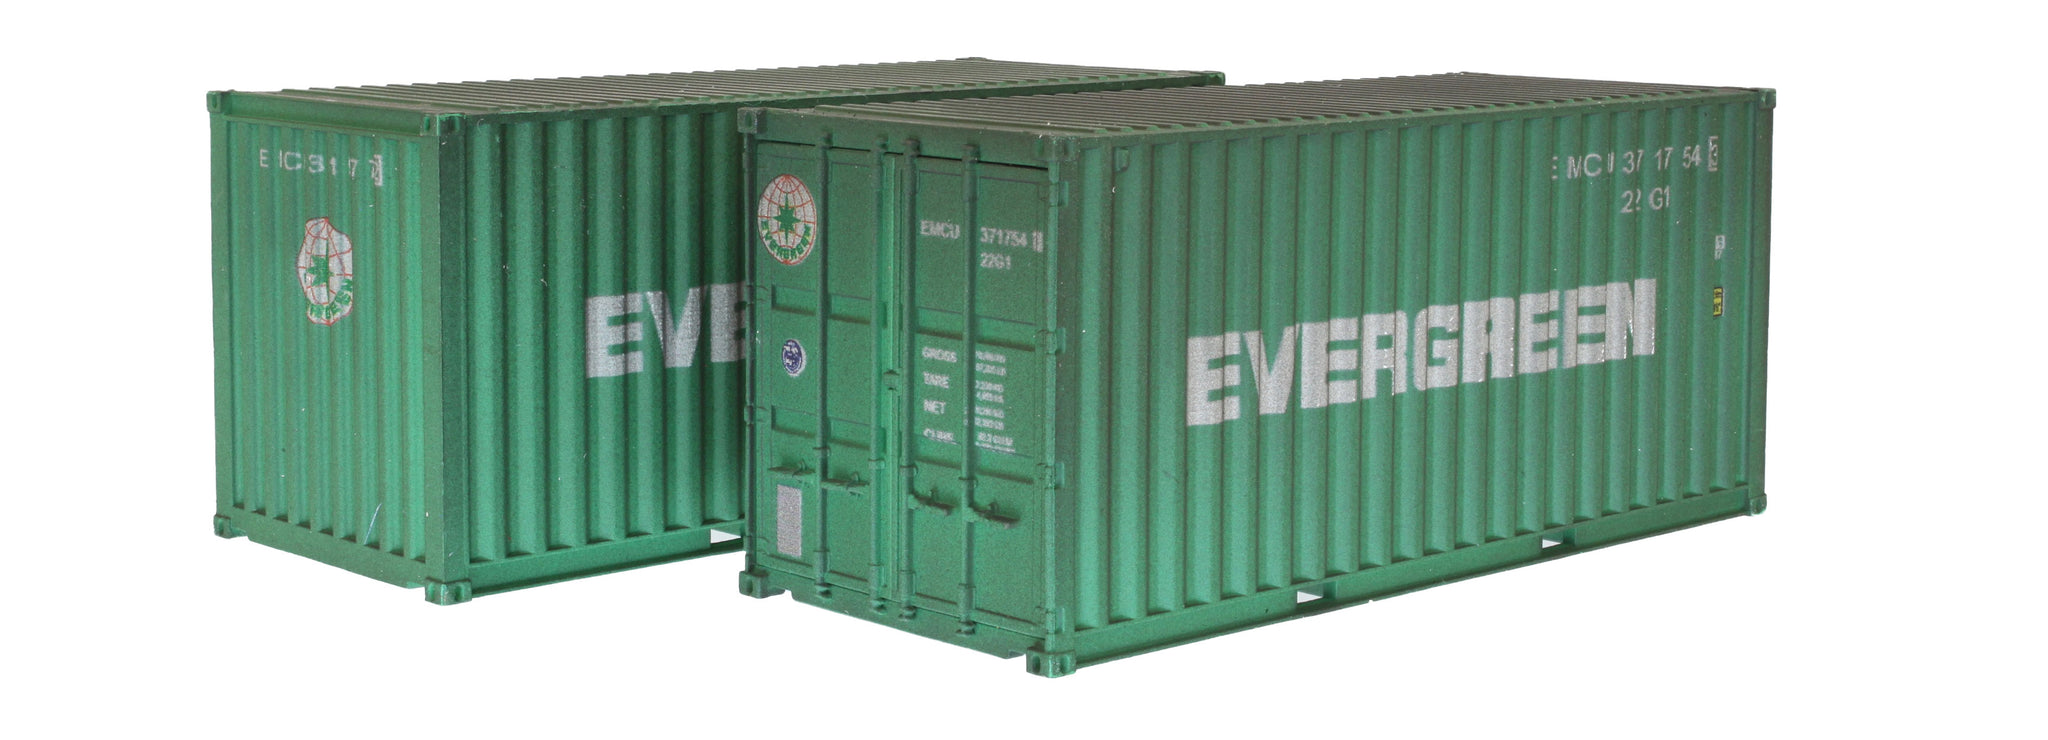 4F-028-056 OO Gauge Container 20FT Evergreen EMCU Twin Pack 7591 5 & 01151 3 Weathered